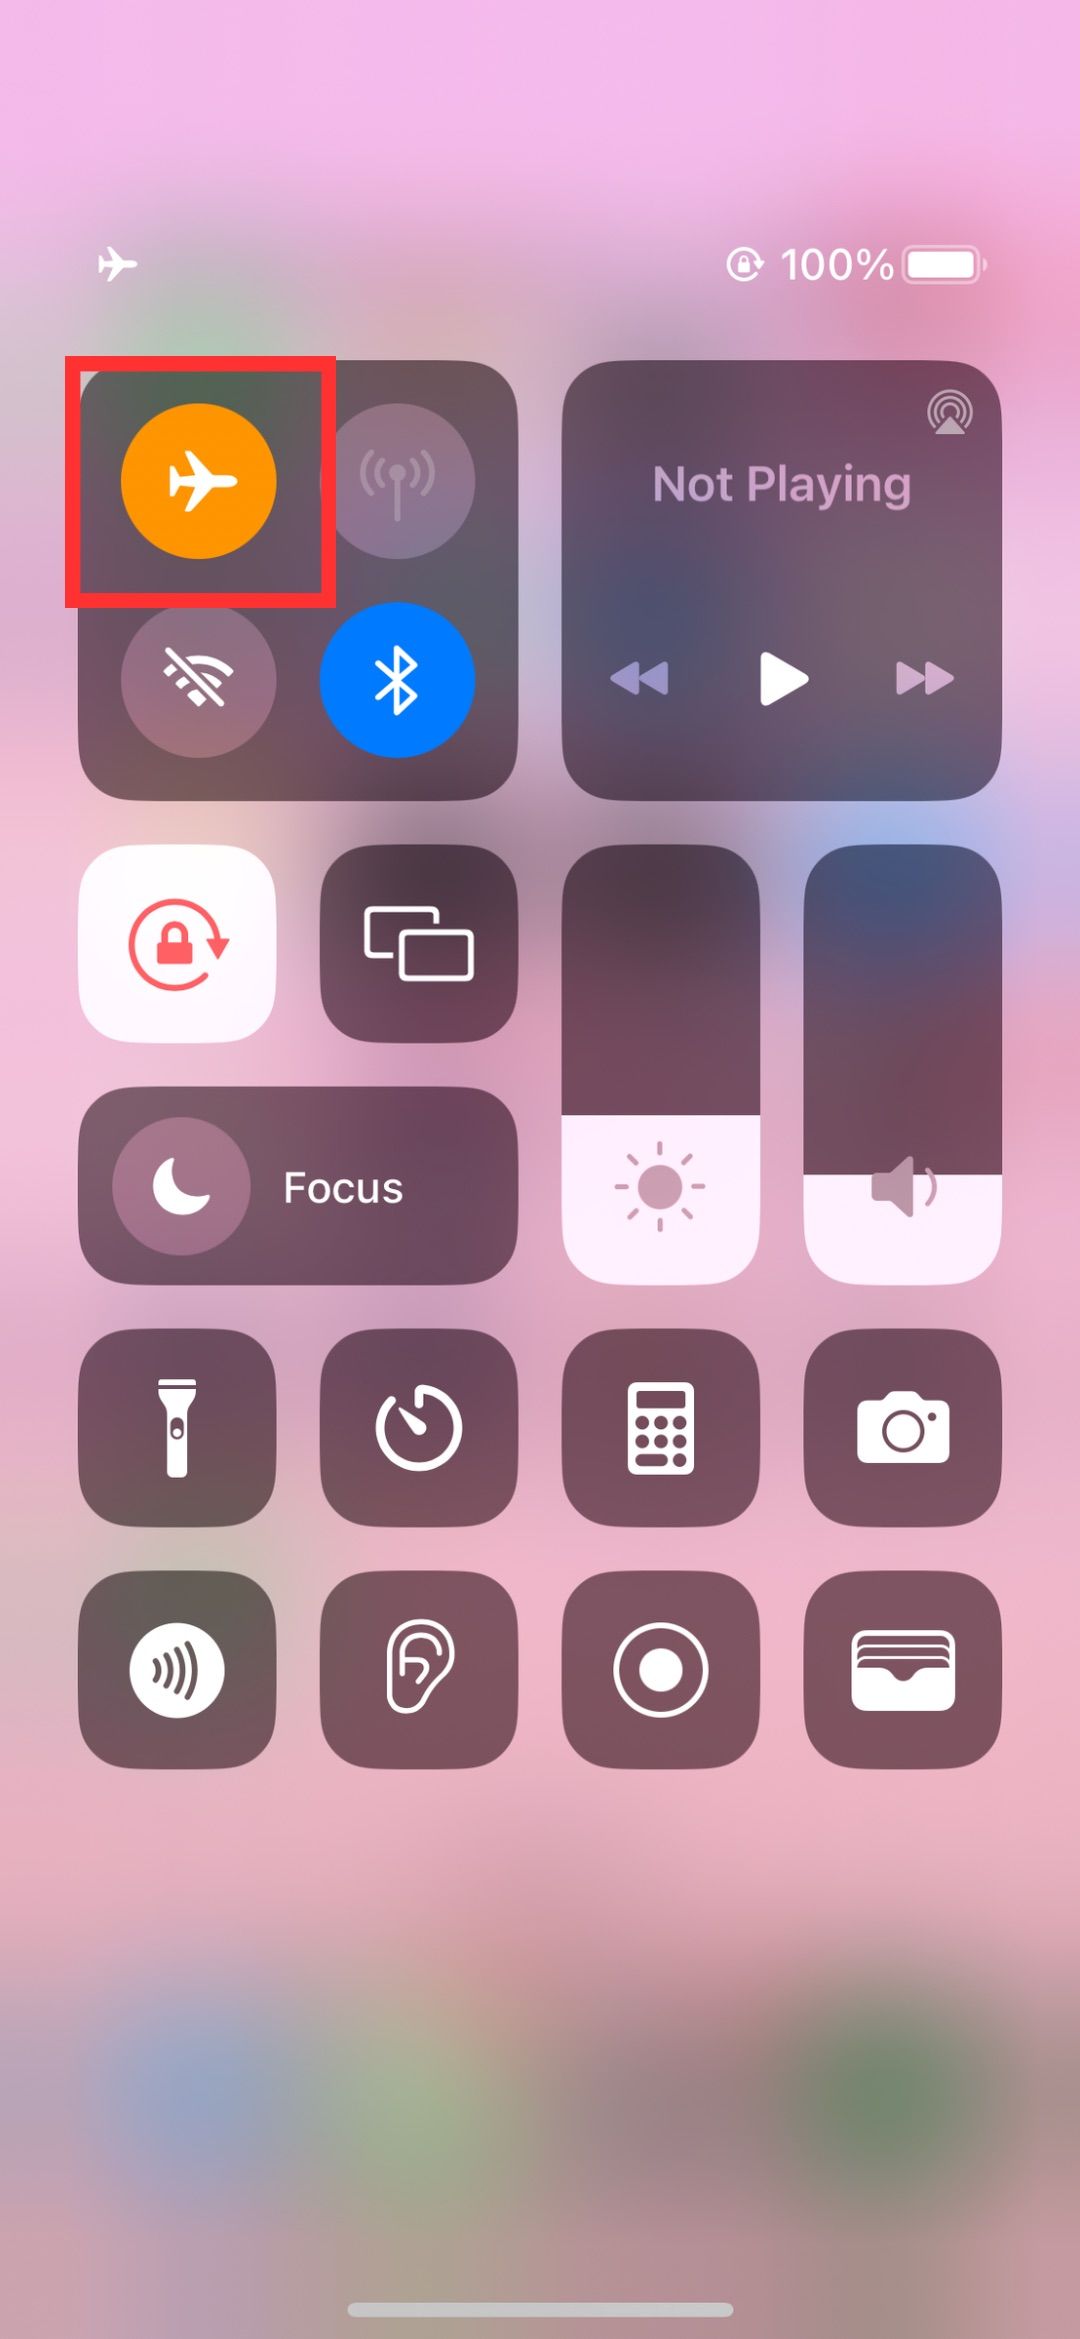 IPhone Airplane Mode from Drop Down Menu